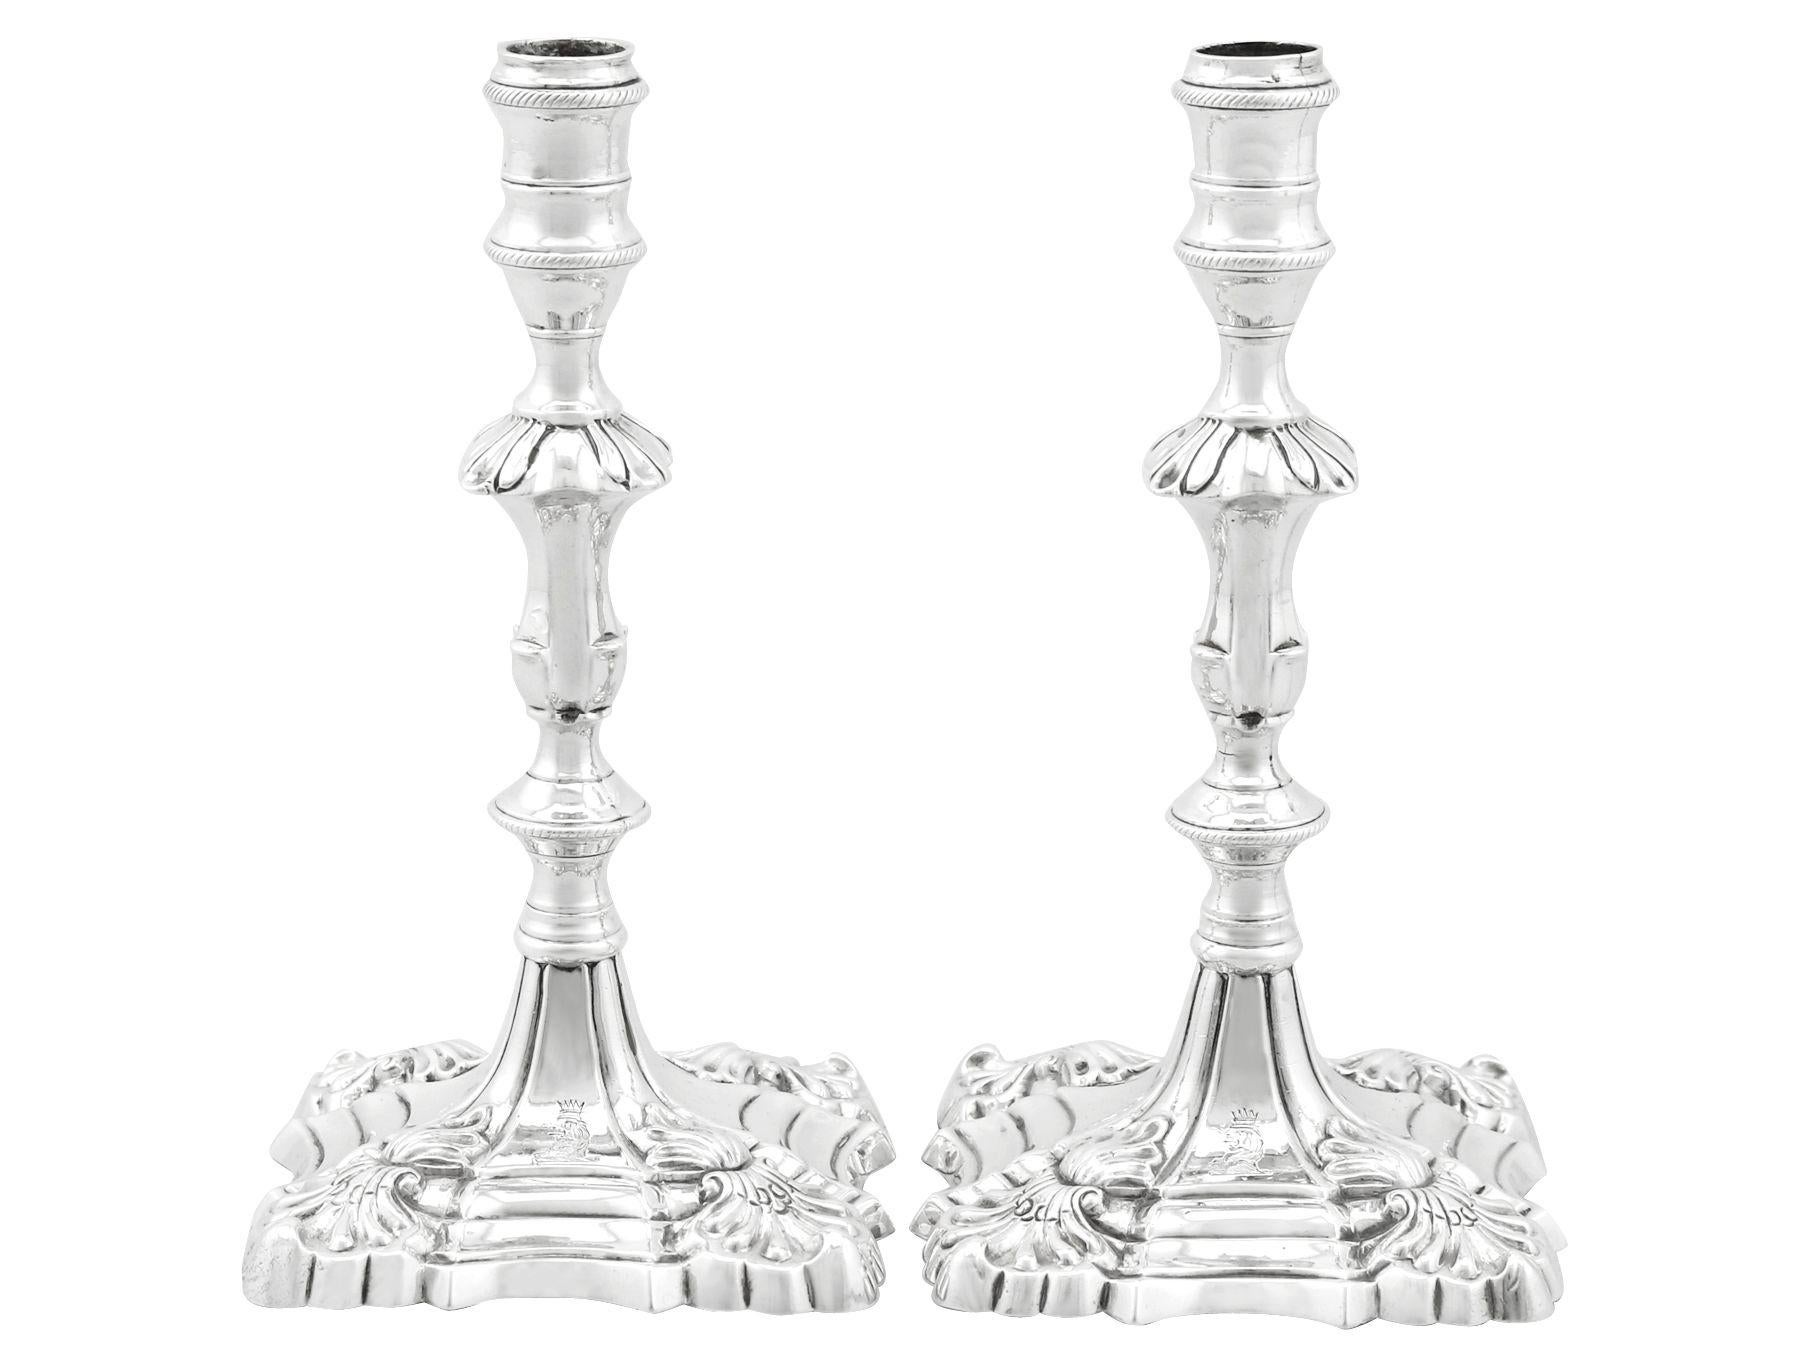 An exceptional, fine and impressive pair of antique George III English cast sterling silver tapersticks; an addition of our ornamental Georgian silverware collection

These exceptional antique George III cast sterling silver taper candlesticks